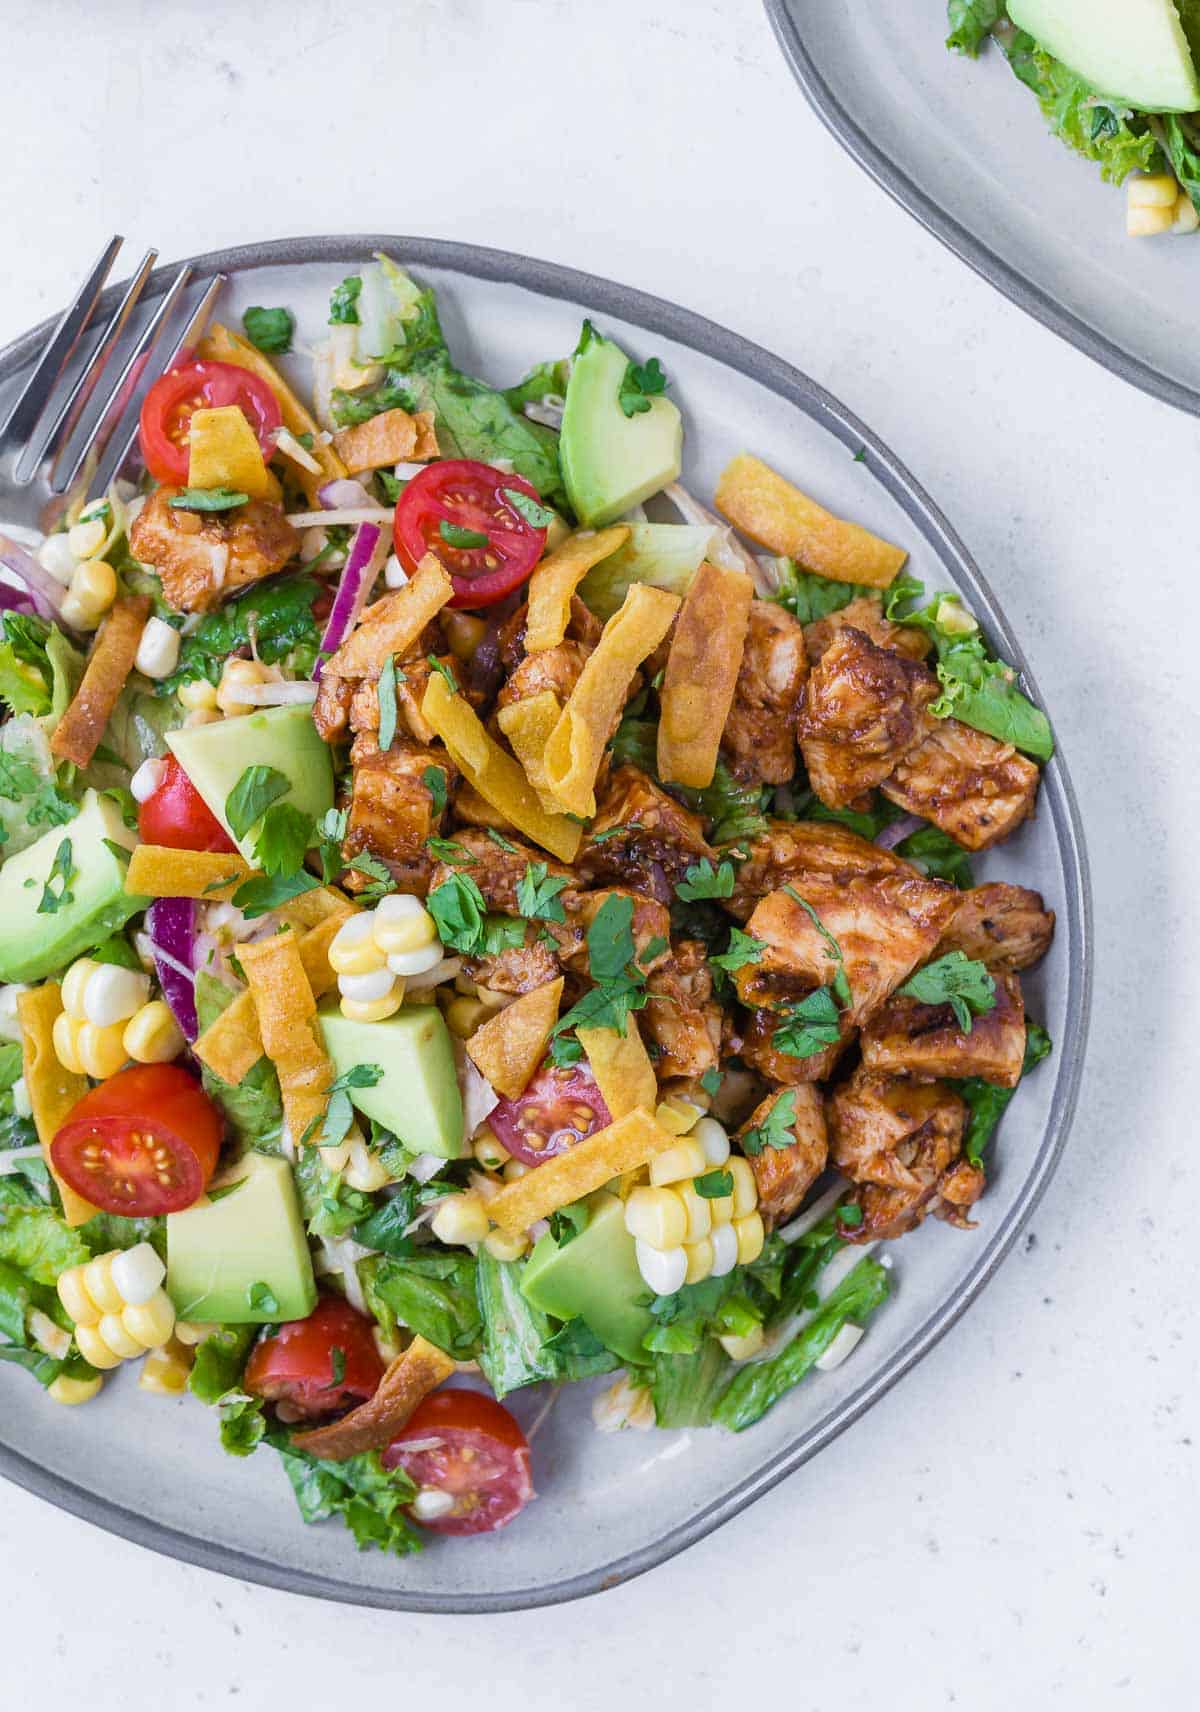 Overhead view of a colorful chopped salad on a grey plate. Salad includes bbq grilled chicken, lettuce, onion, tomato, crispy tortilla strips, avocado, corn and more!